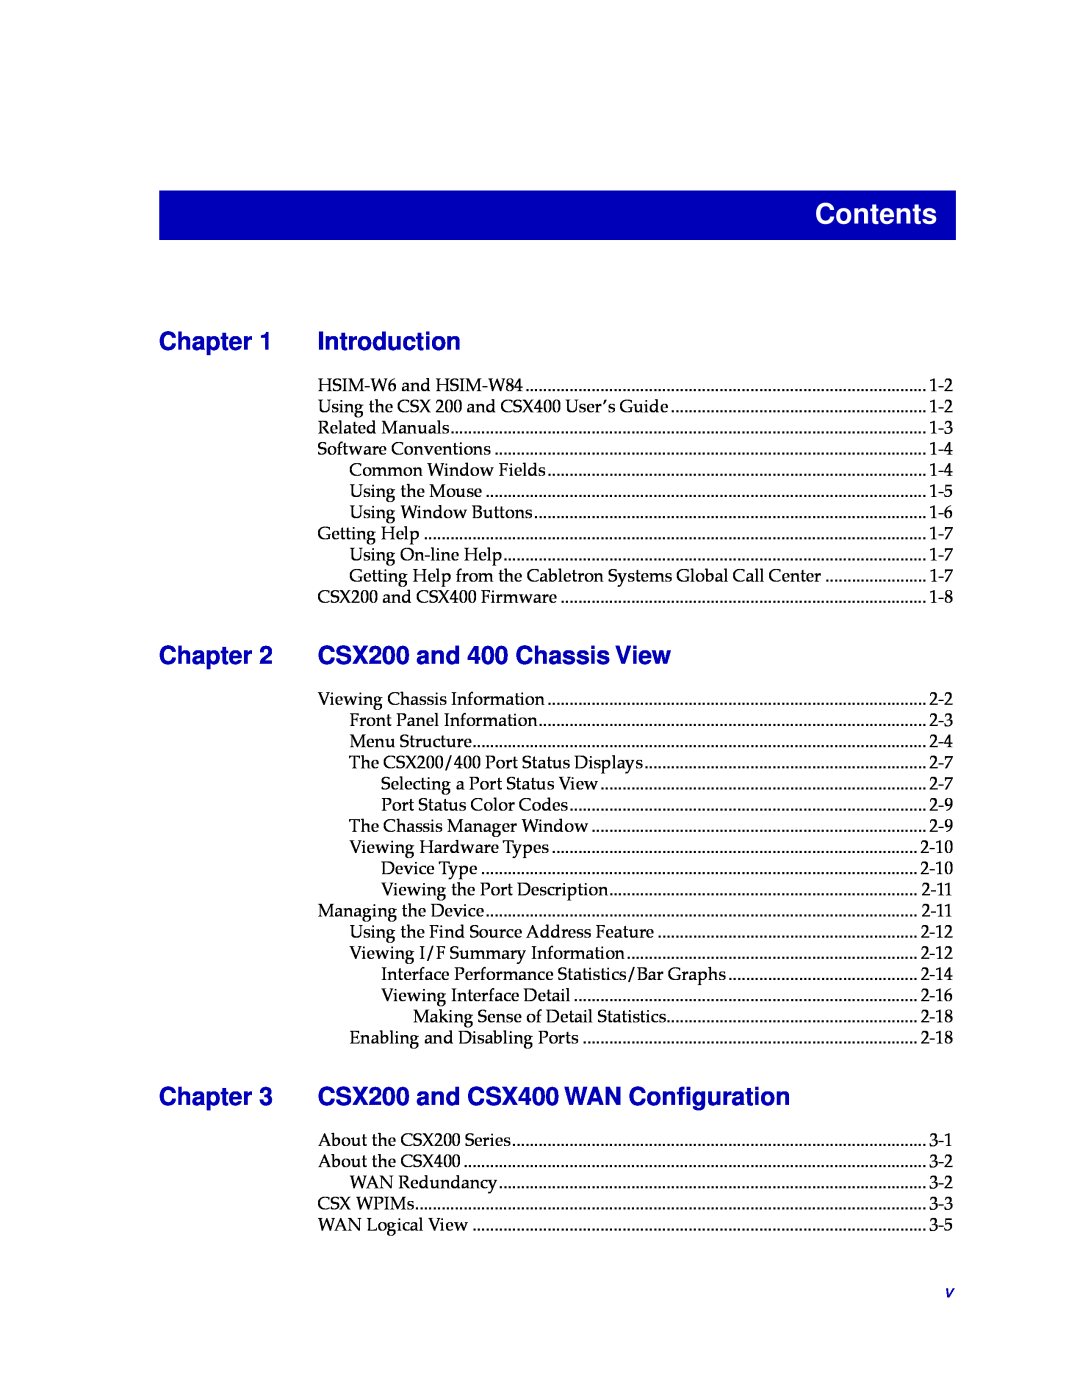 Cabletron Systems Contents, Chapter, CSX200 and CSX400 WAN Conﬁguration, Introduction, CSX200 and 400 Chassis View 